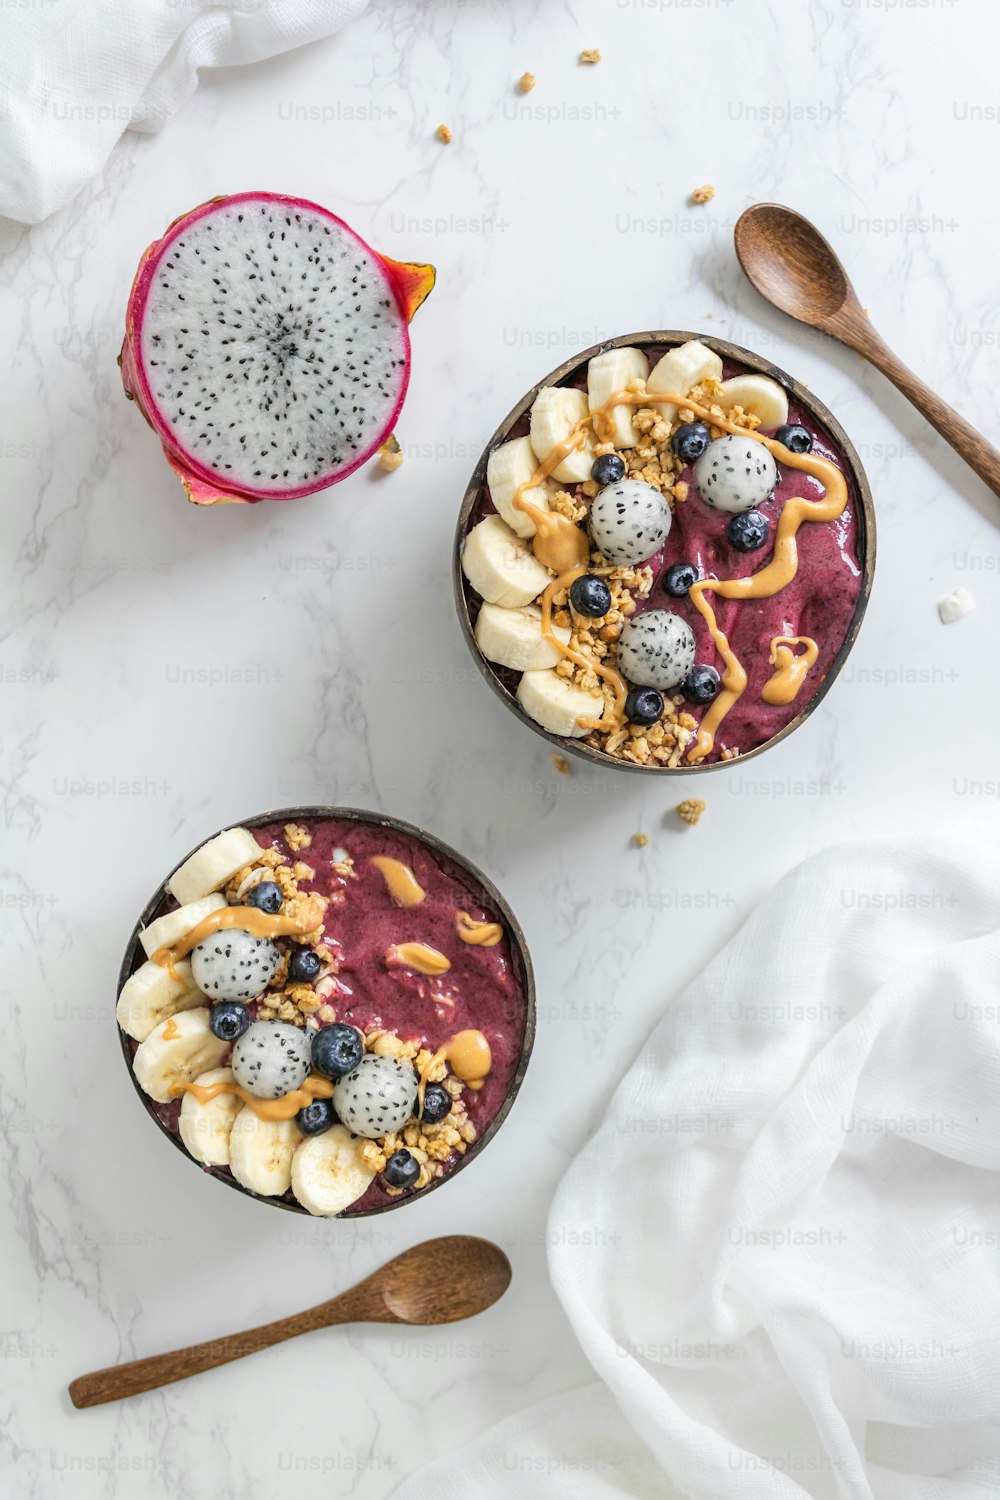 two bowls filled with fruit and nuts next to a spoon